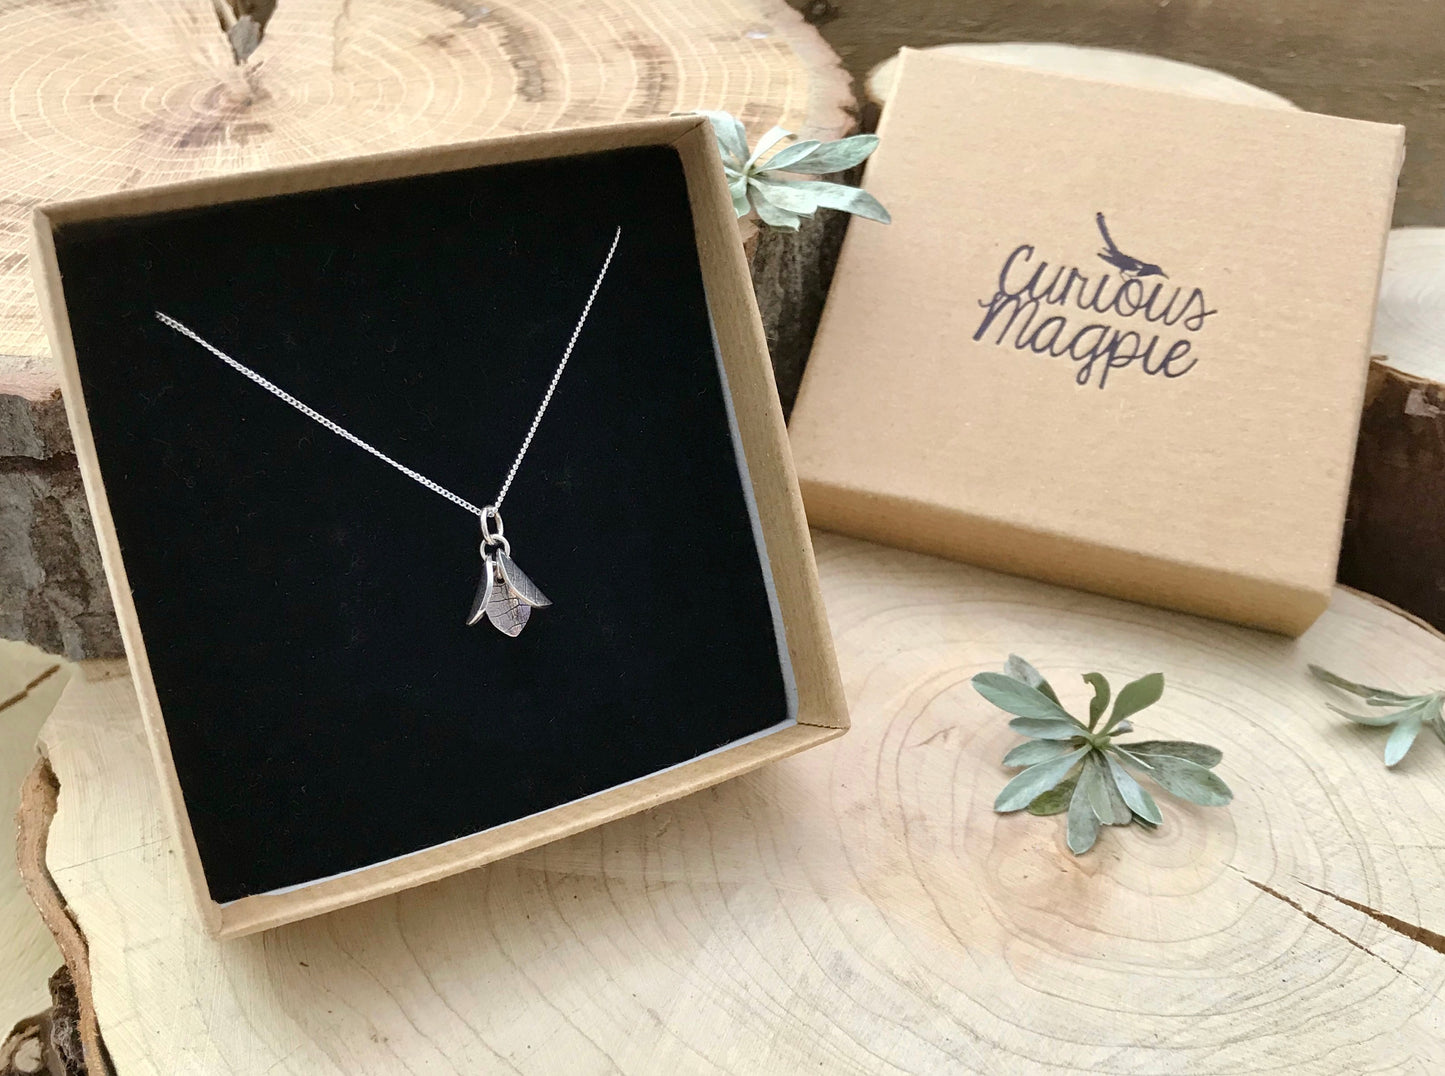 Handmade Silver Bluebell Necklace by Curious Magpie